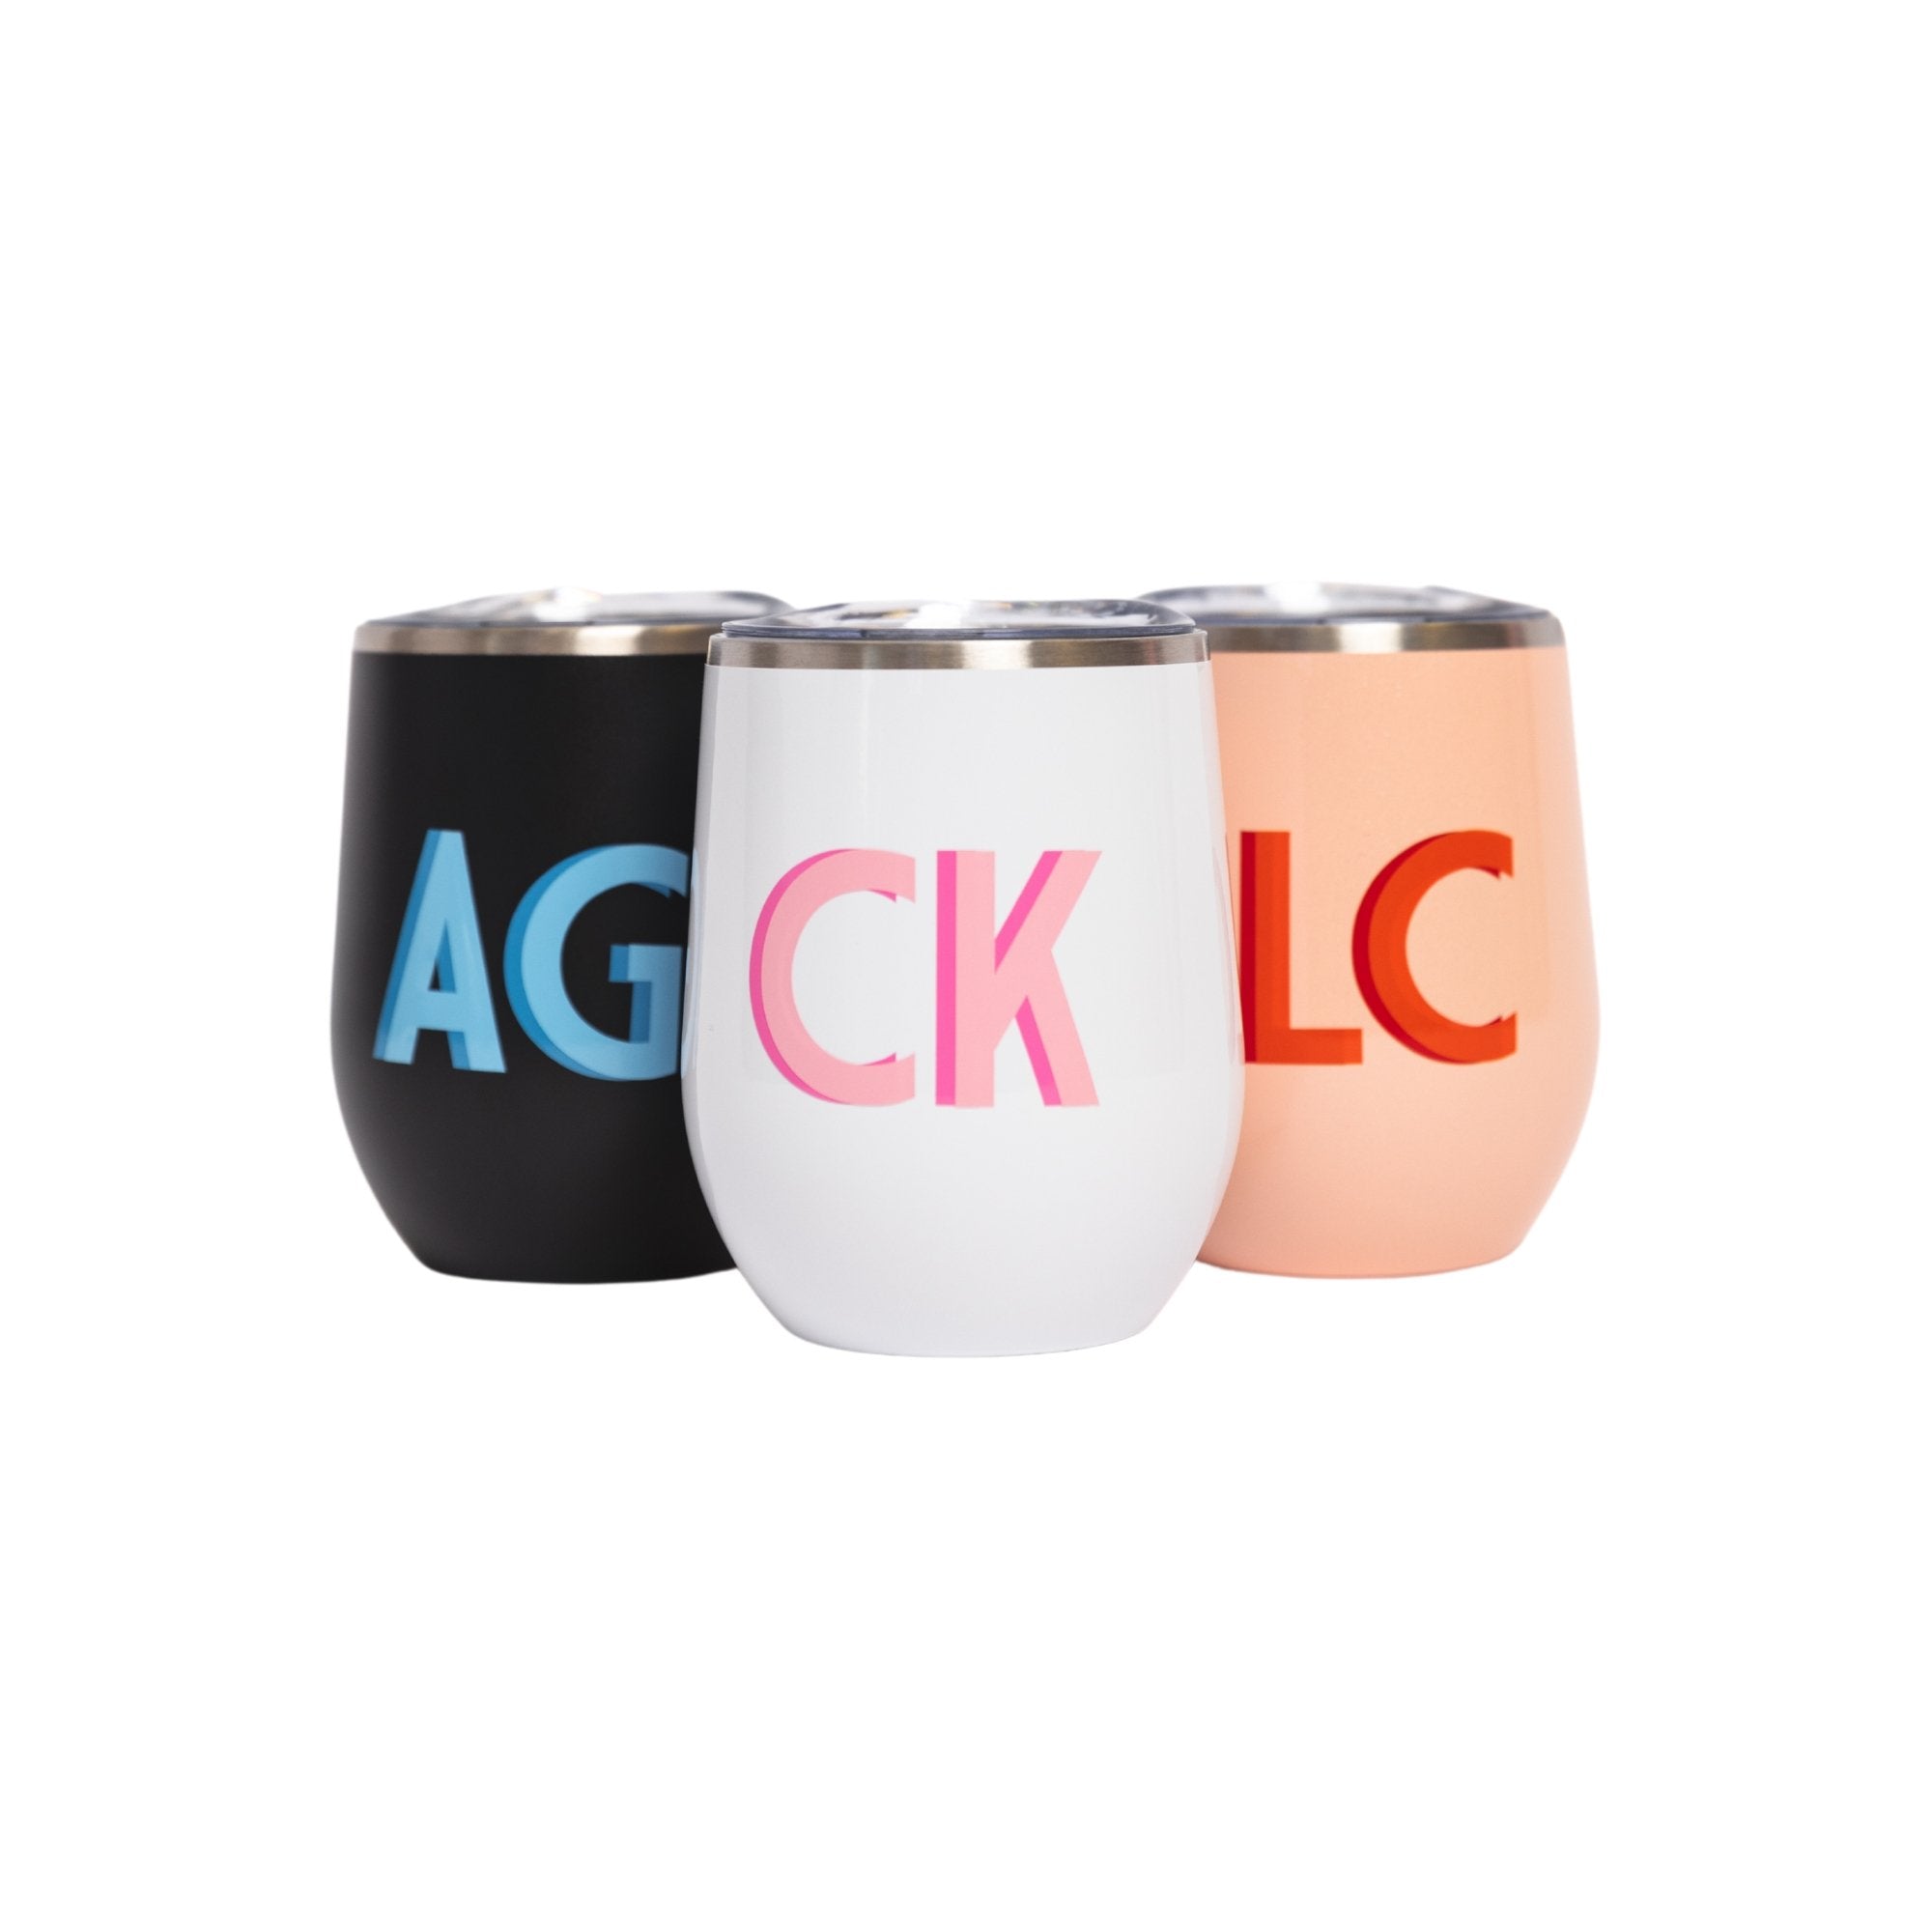 A group of wine tumblers are customized with a shadow monogram